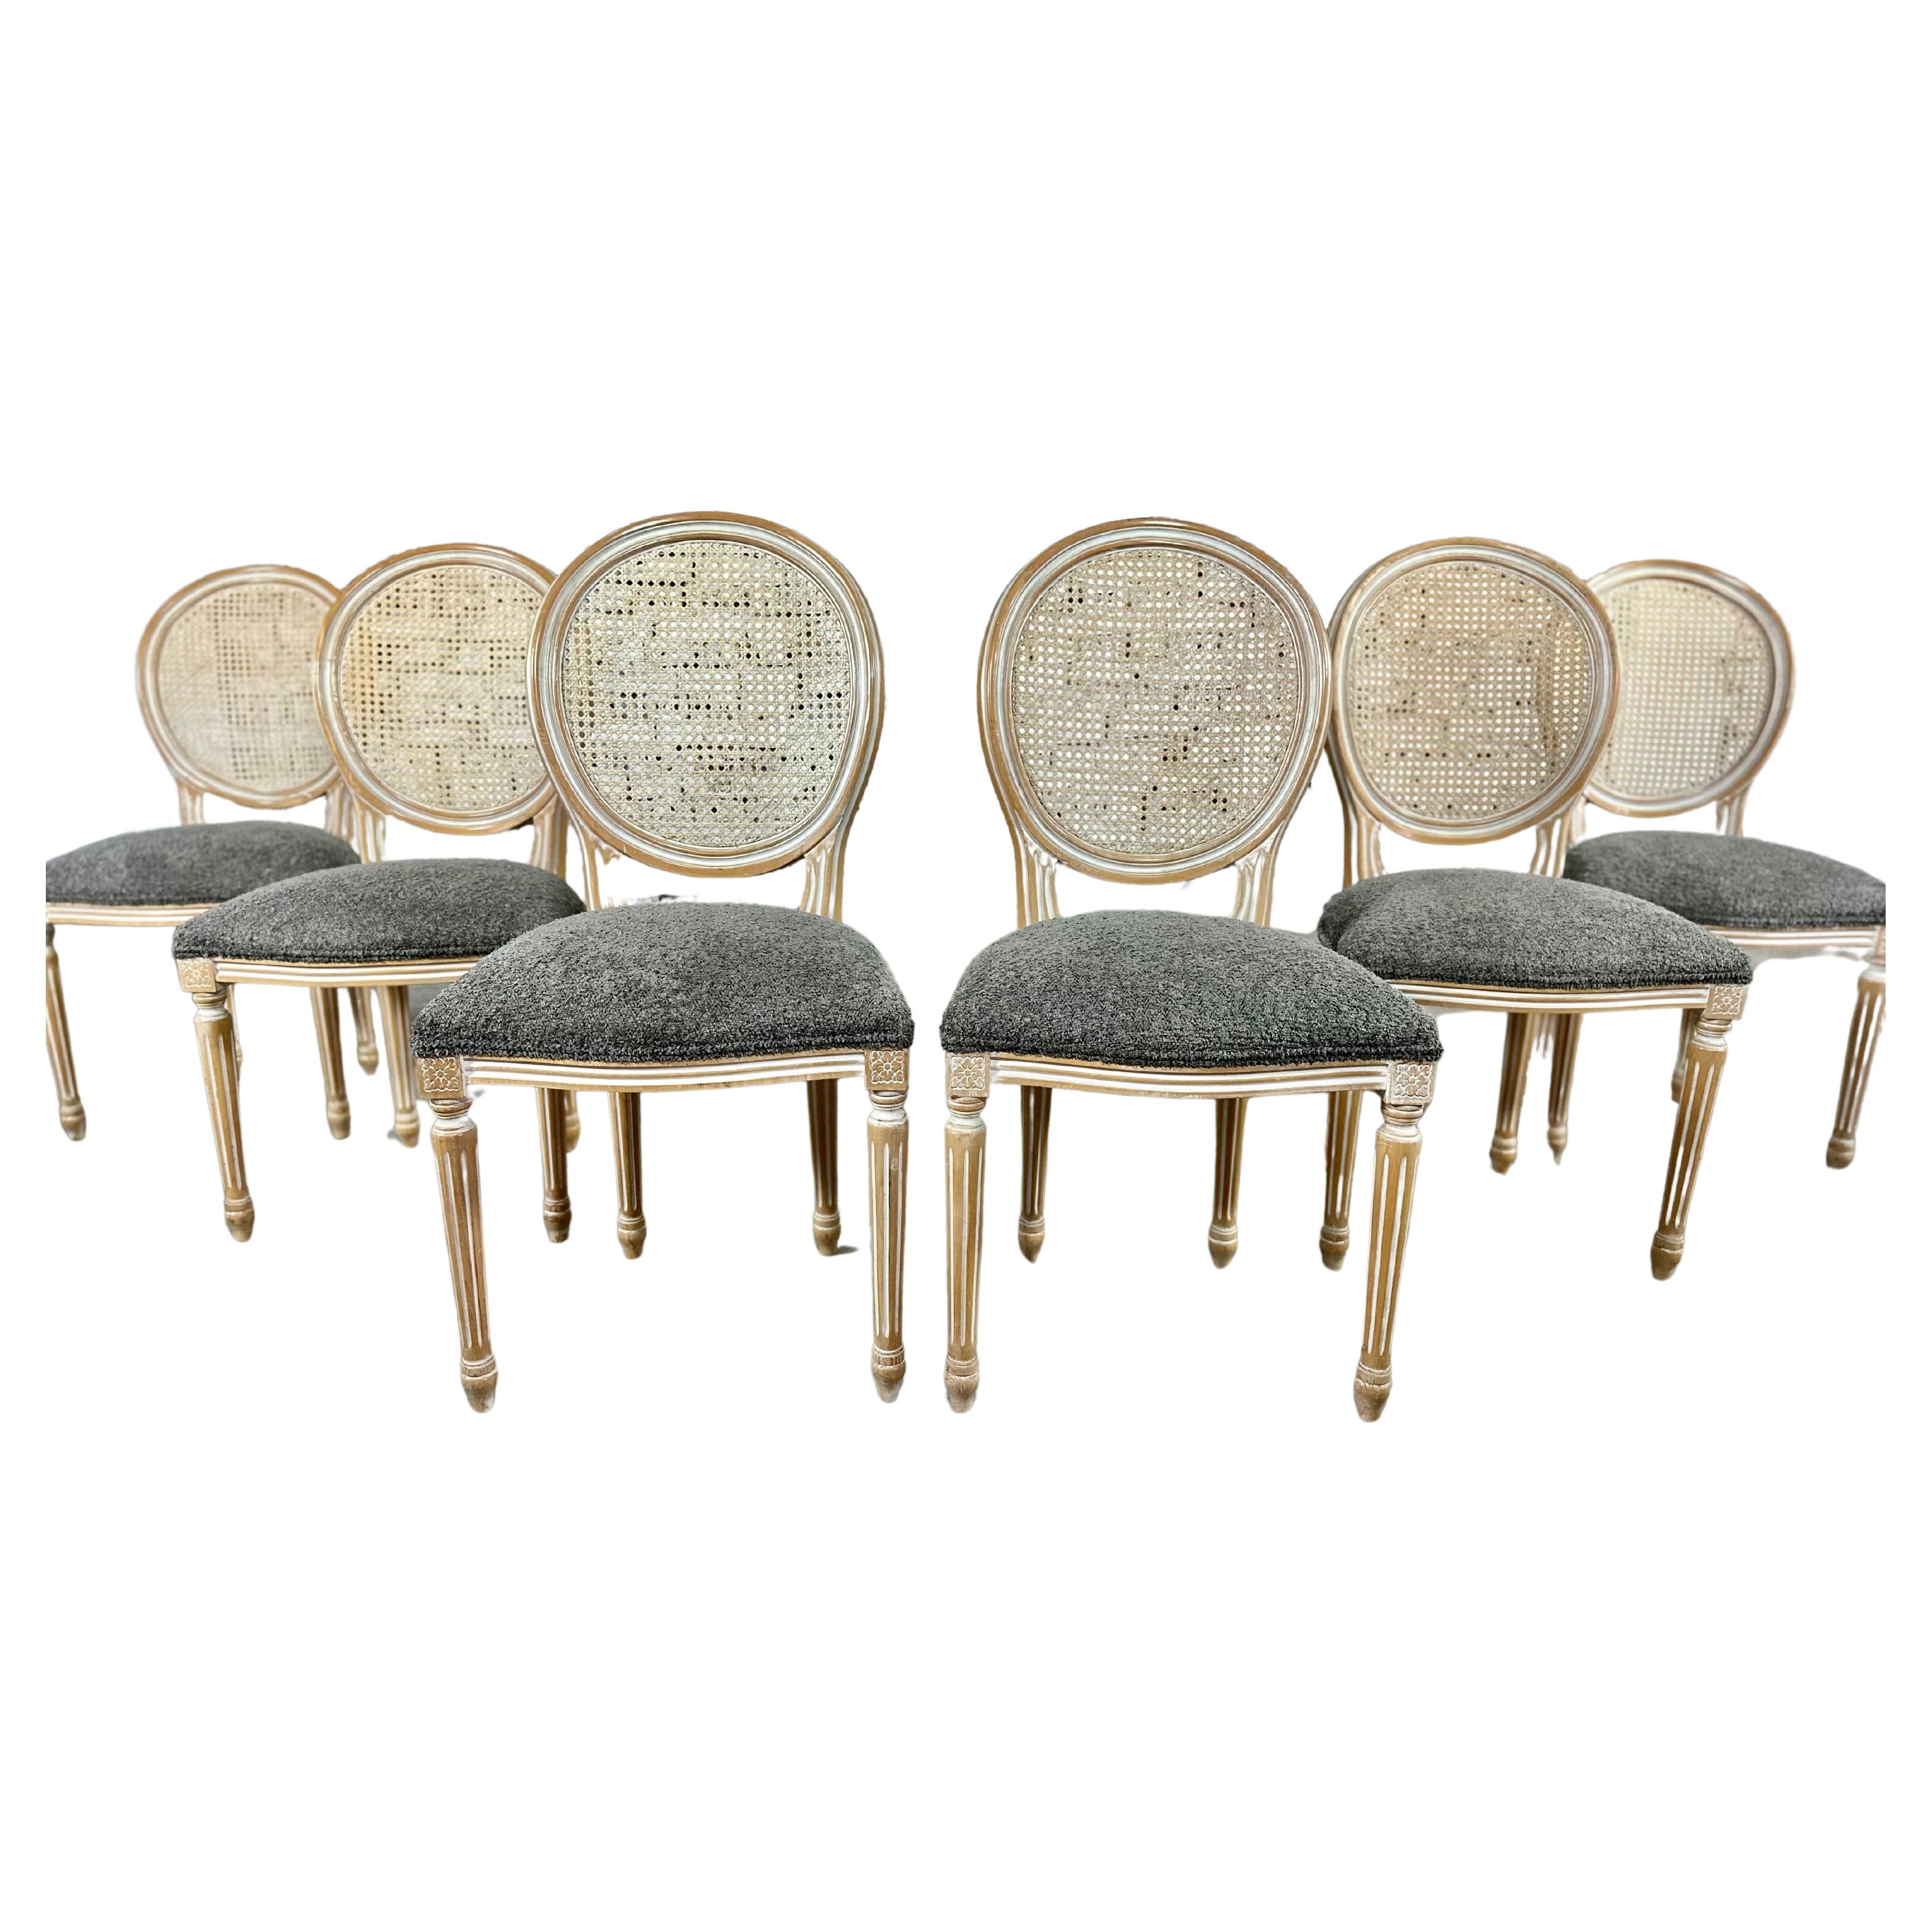 Louis XVI Medallion Cane Back Dining Chairs, Reupholstered - Set of 6 For Sale